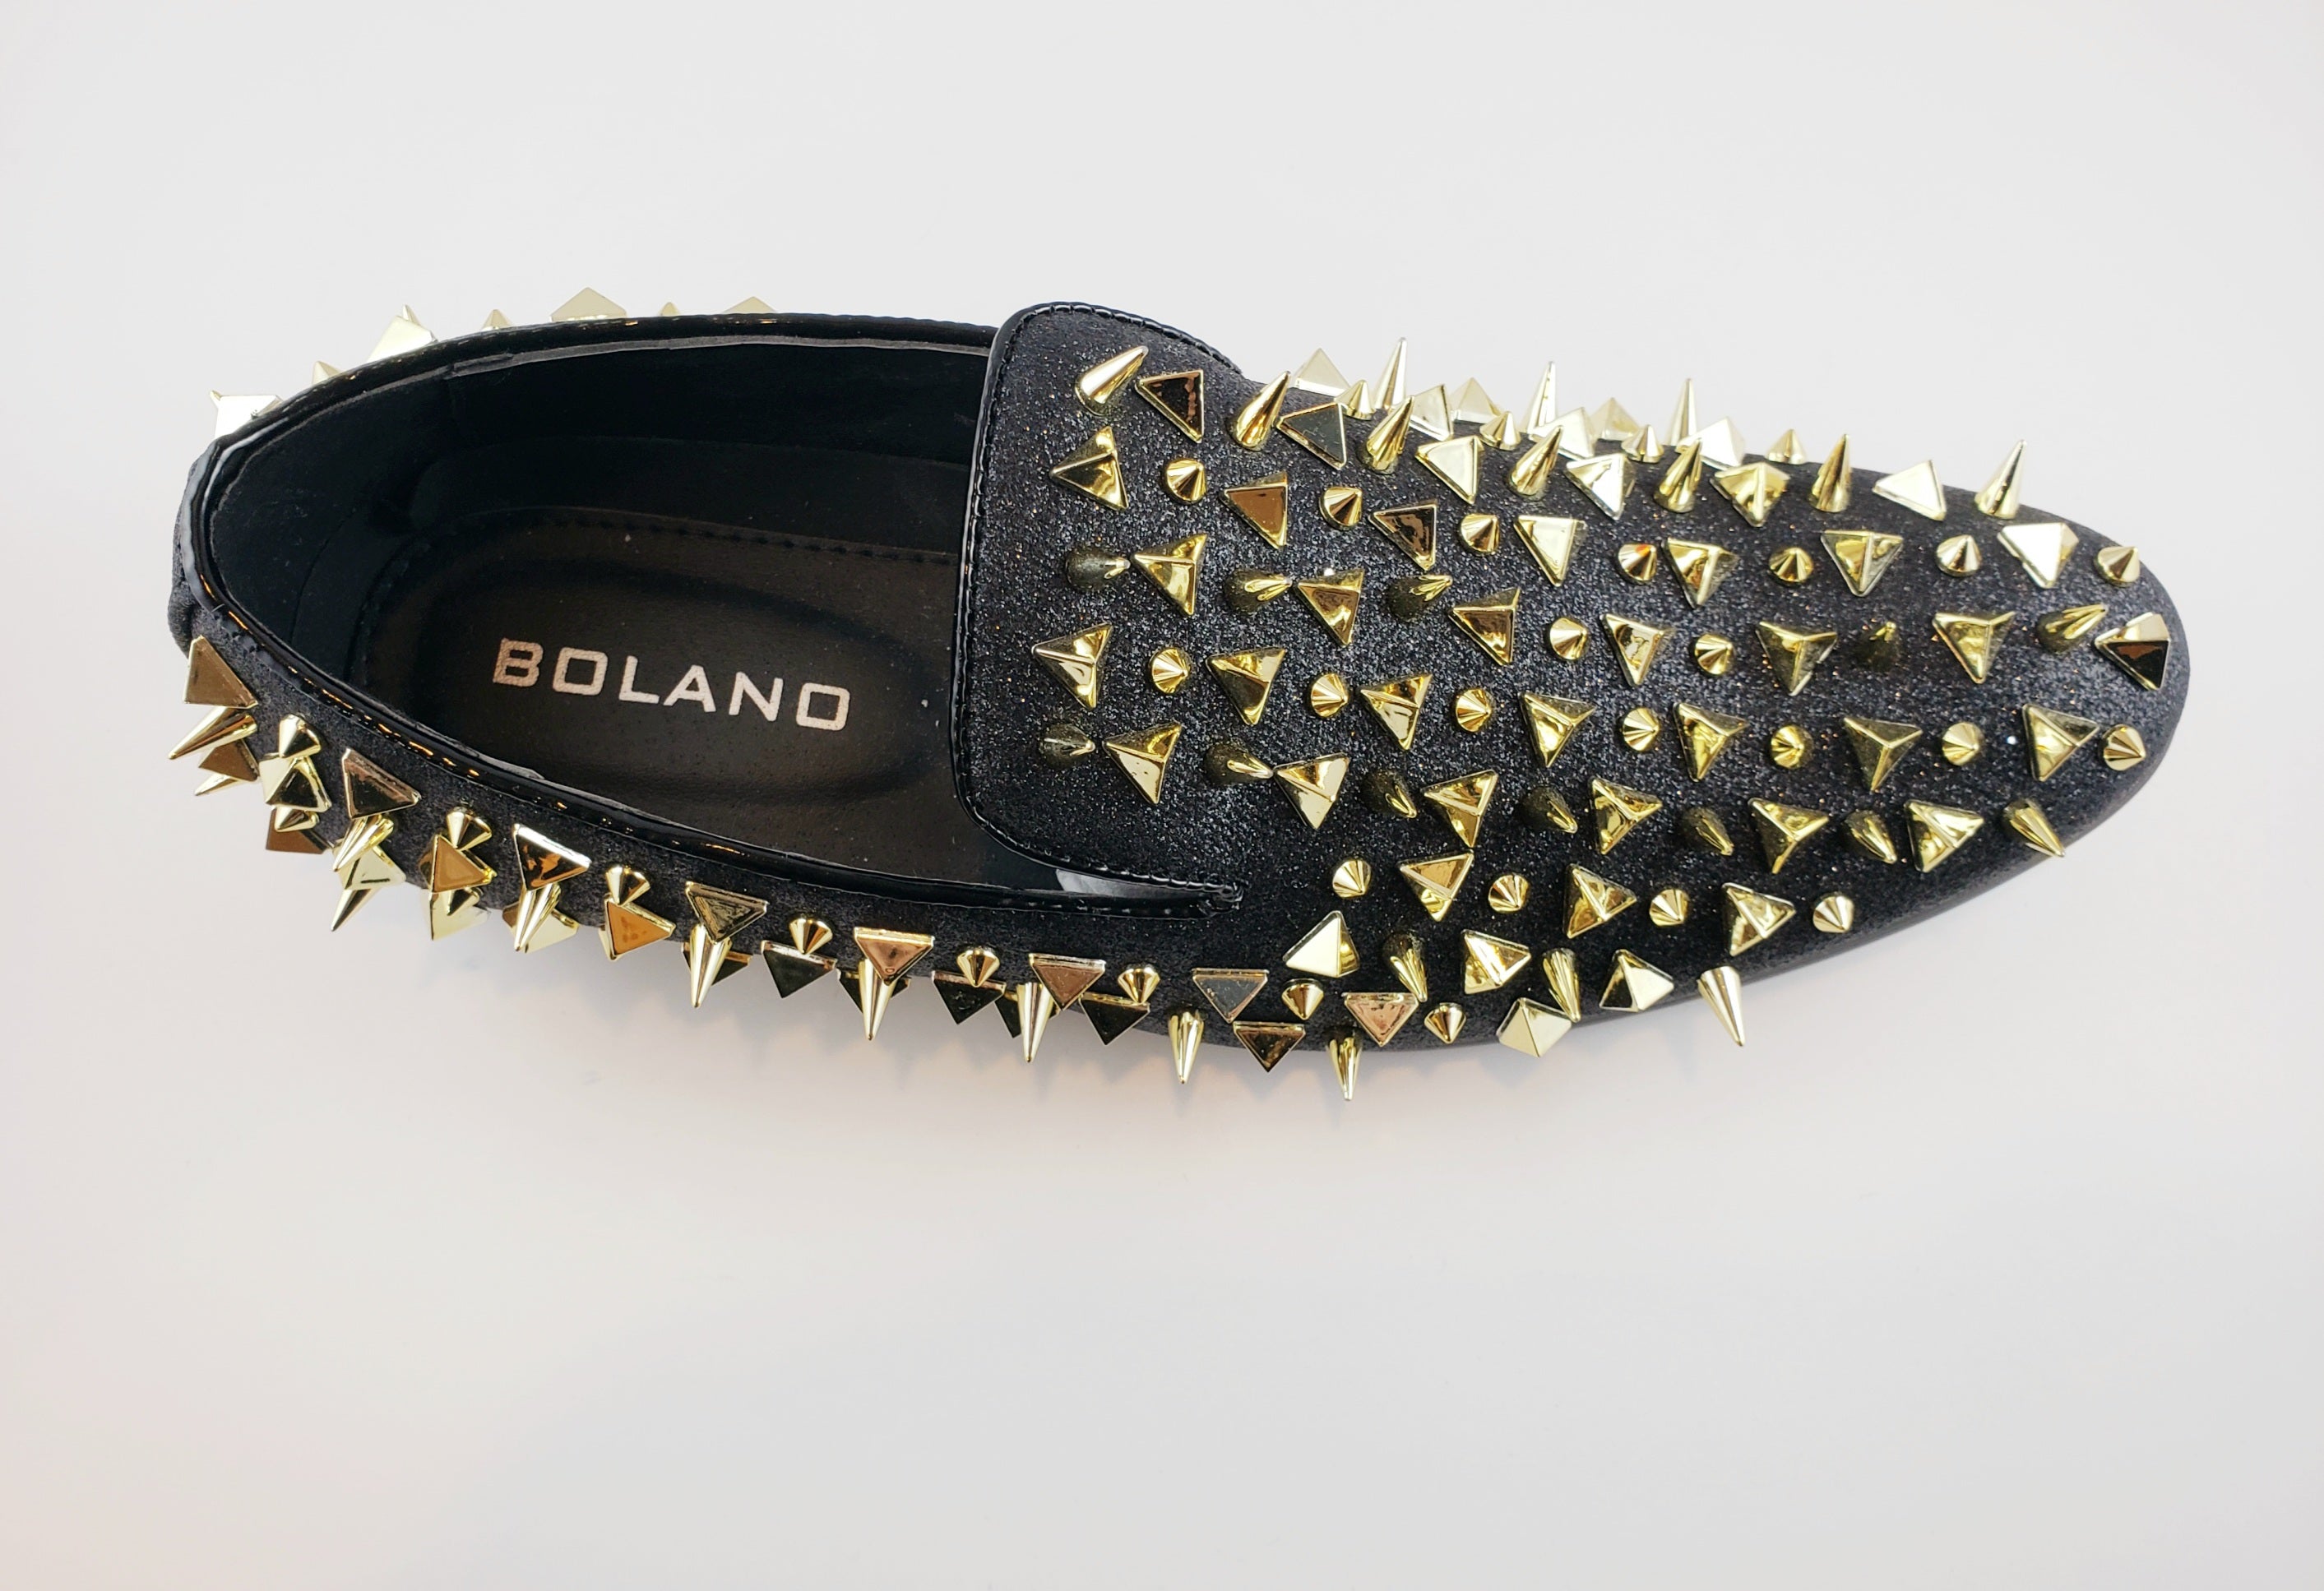 Boland Black and Gold spike shoes